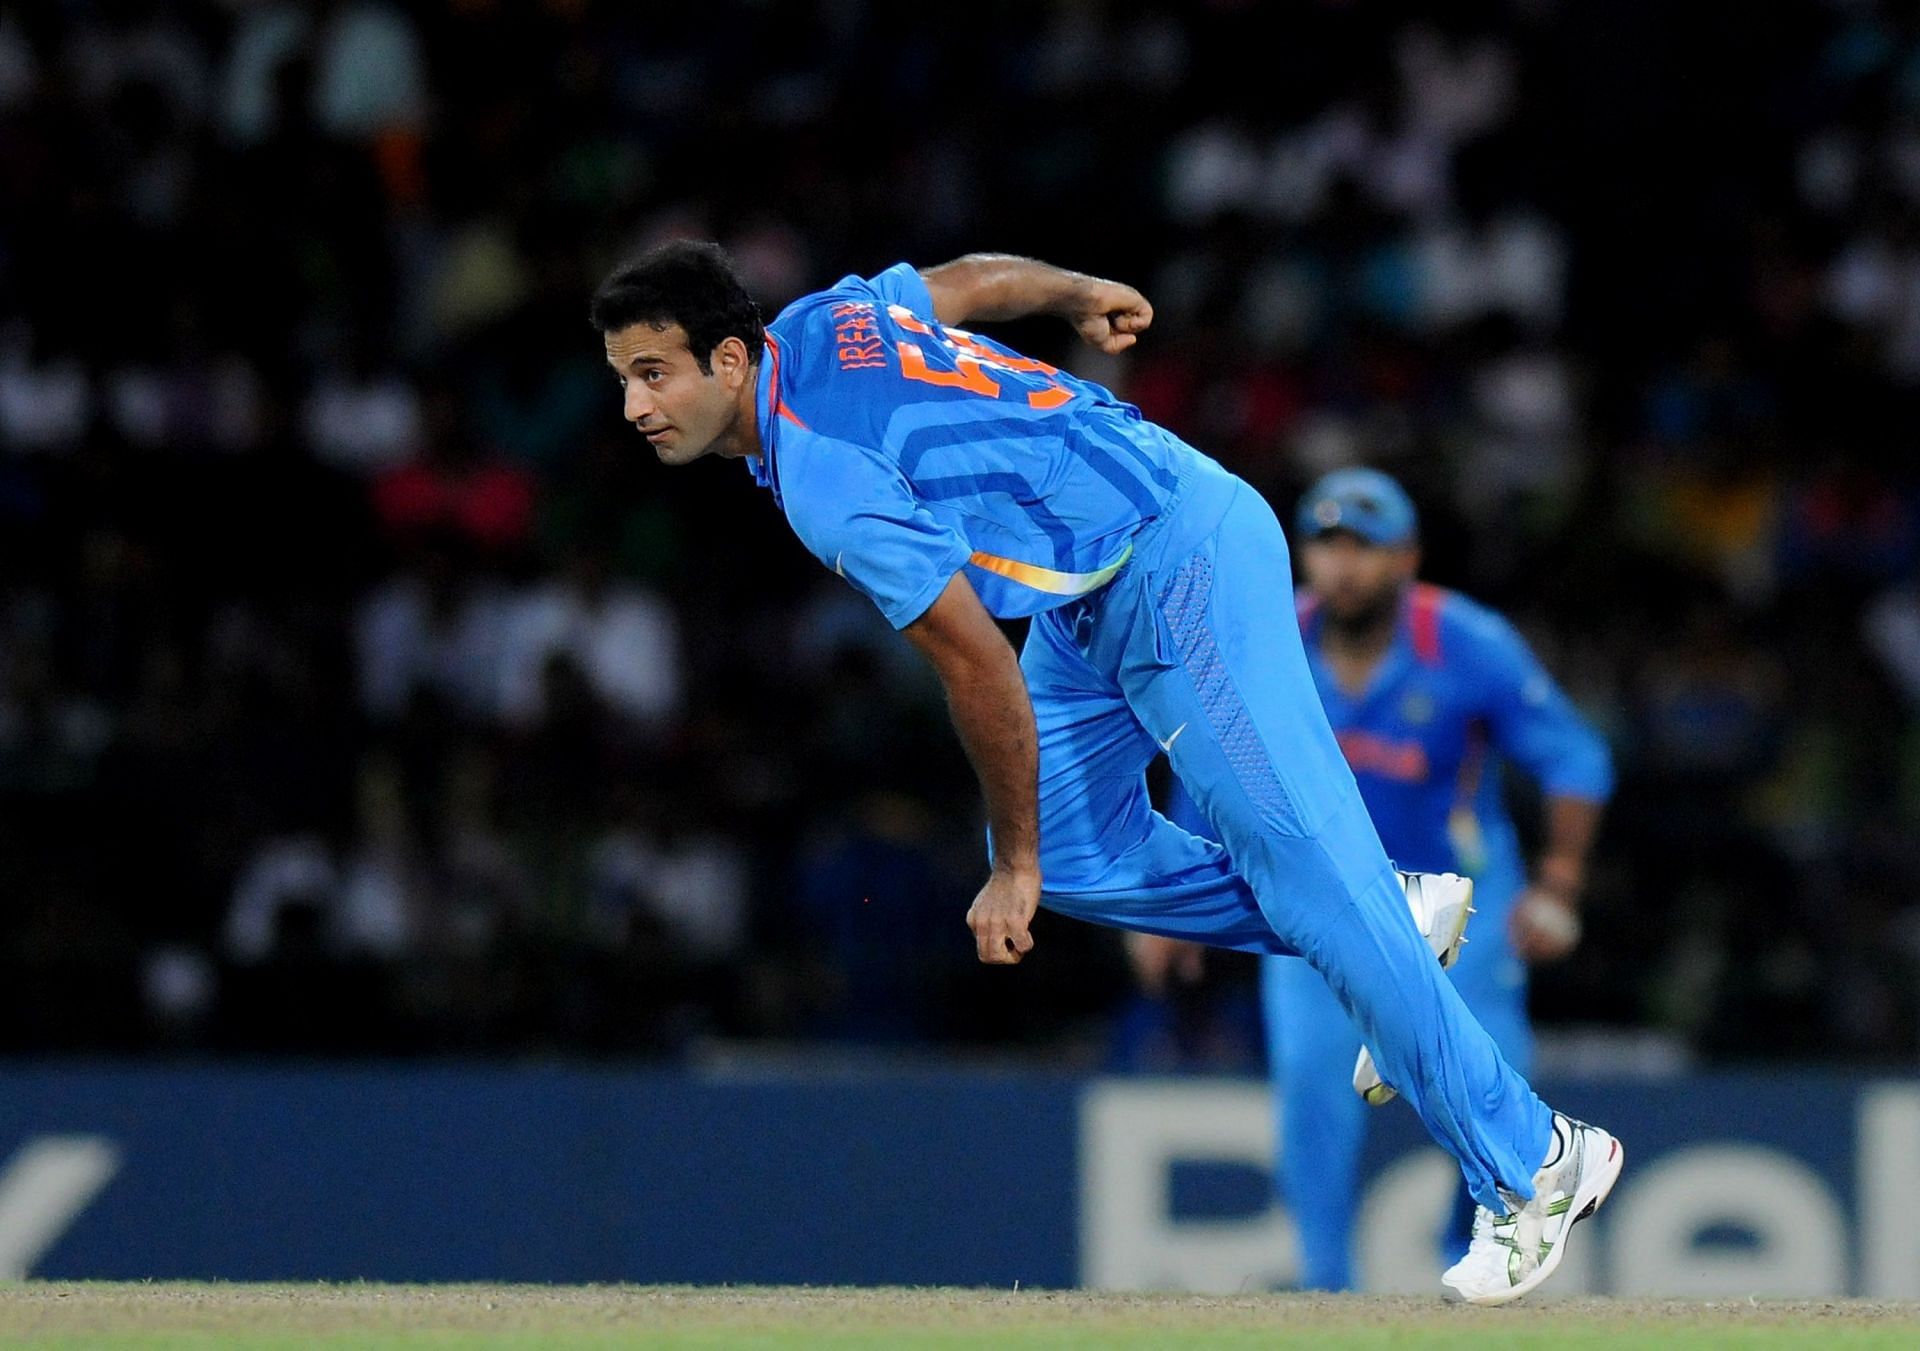 Irfan Pathan has now retired from all formats of international cricket